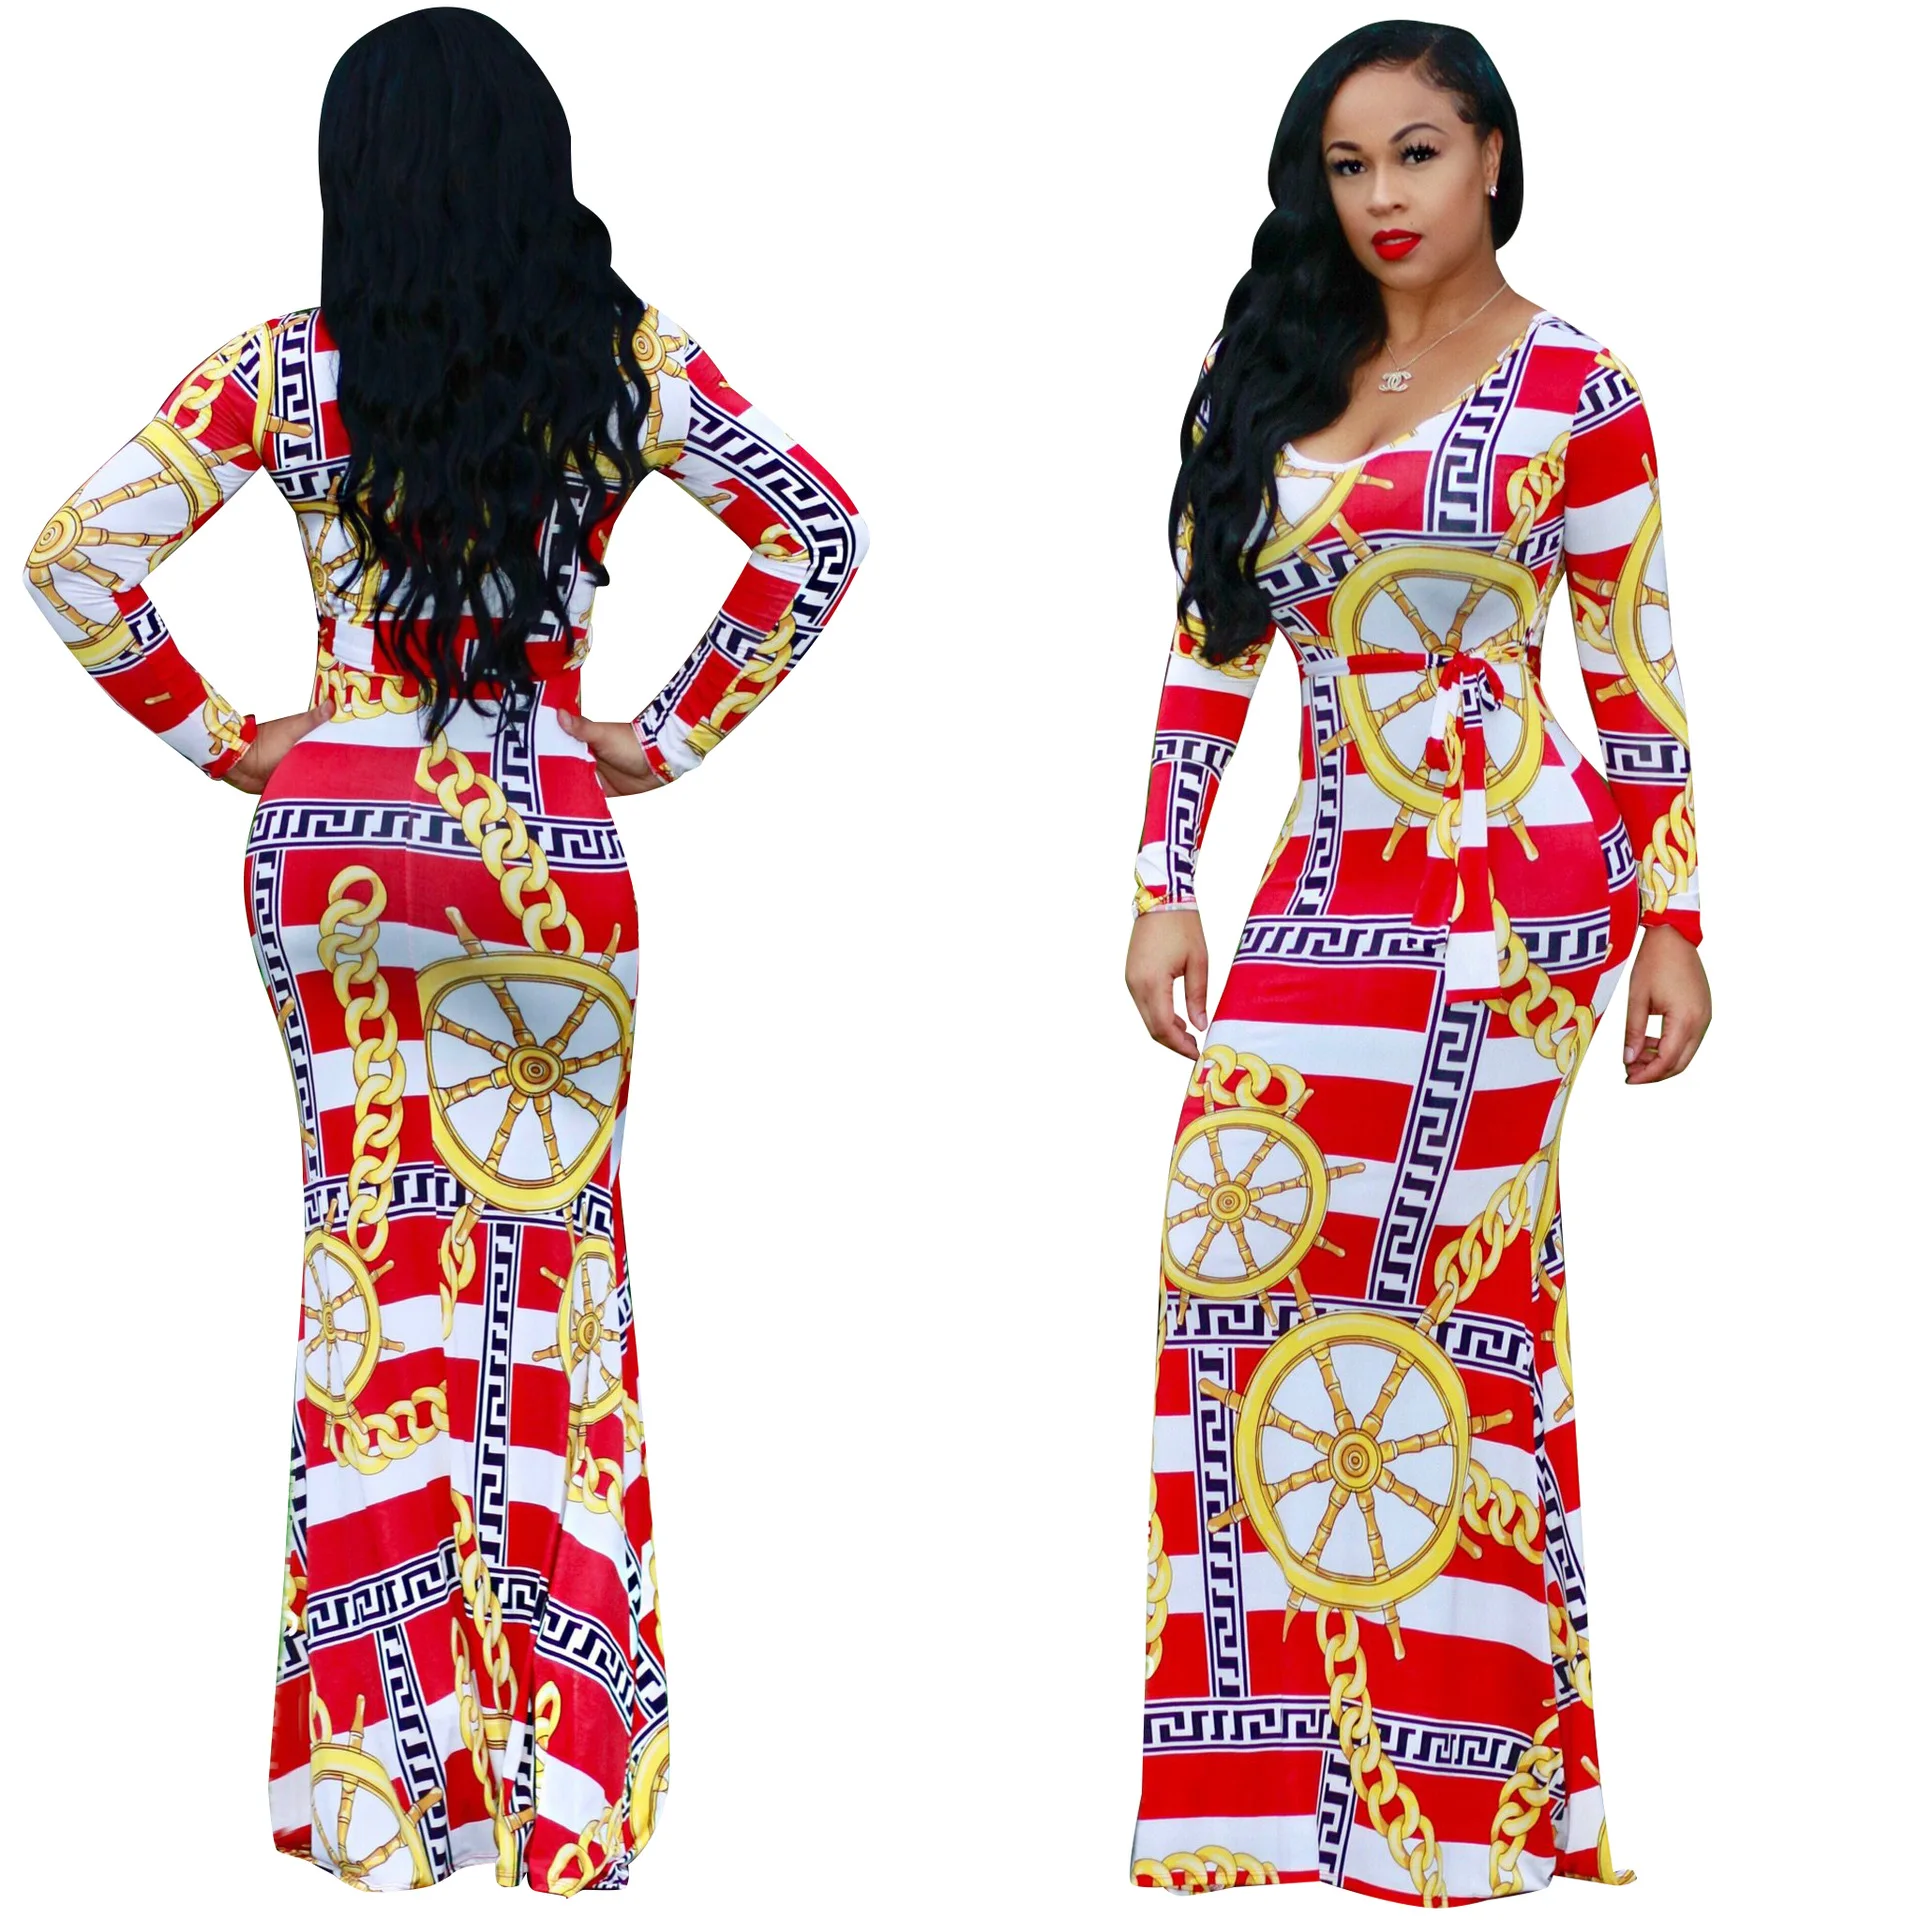 Wholesale Women African Clothing Dresses - Buy Wholesale African ...